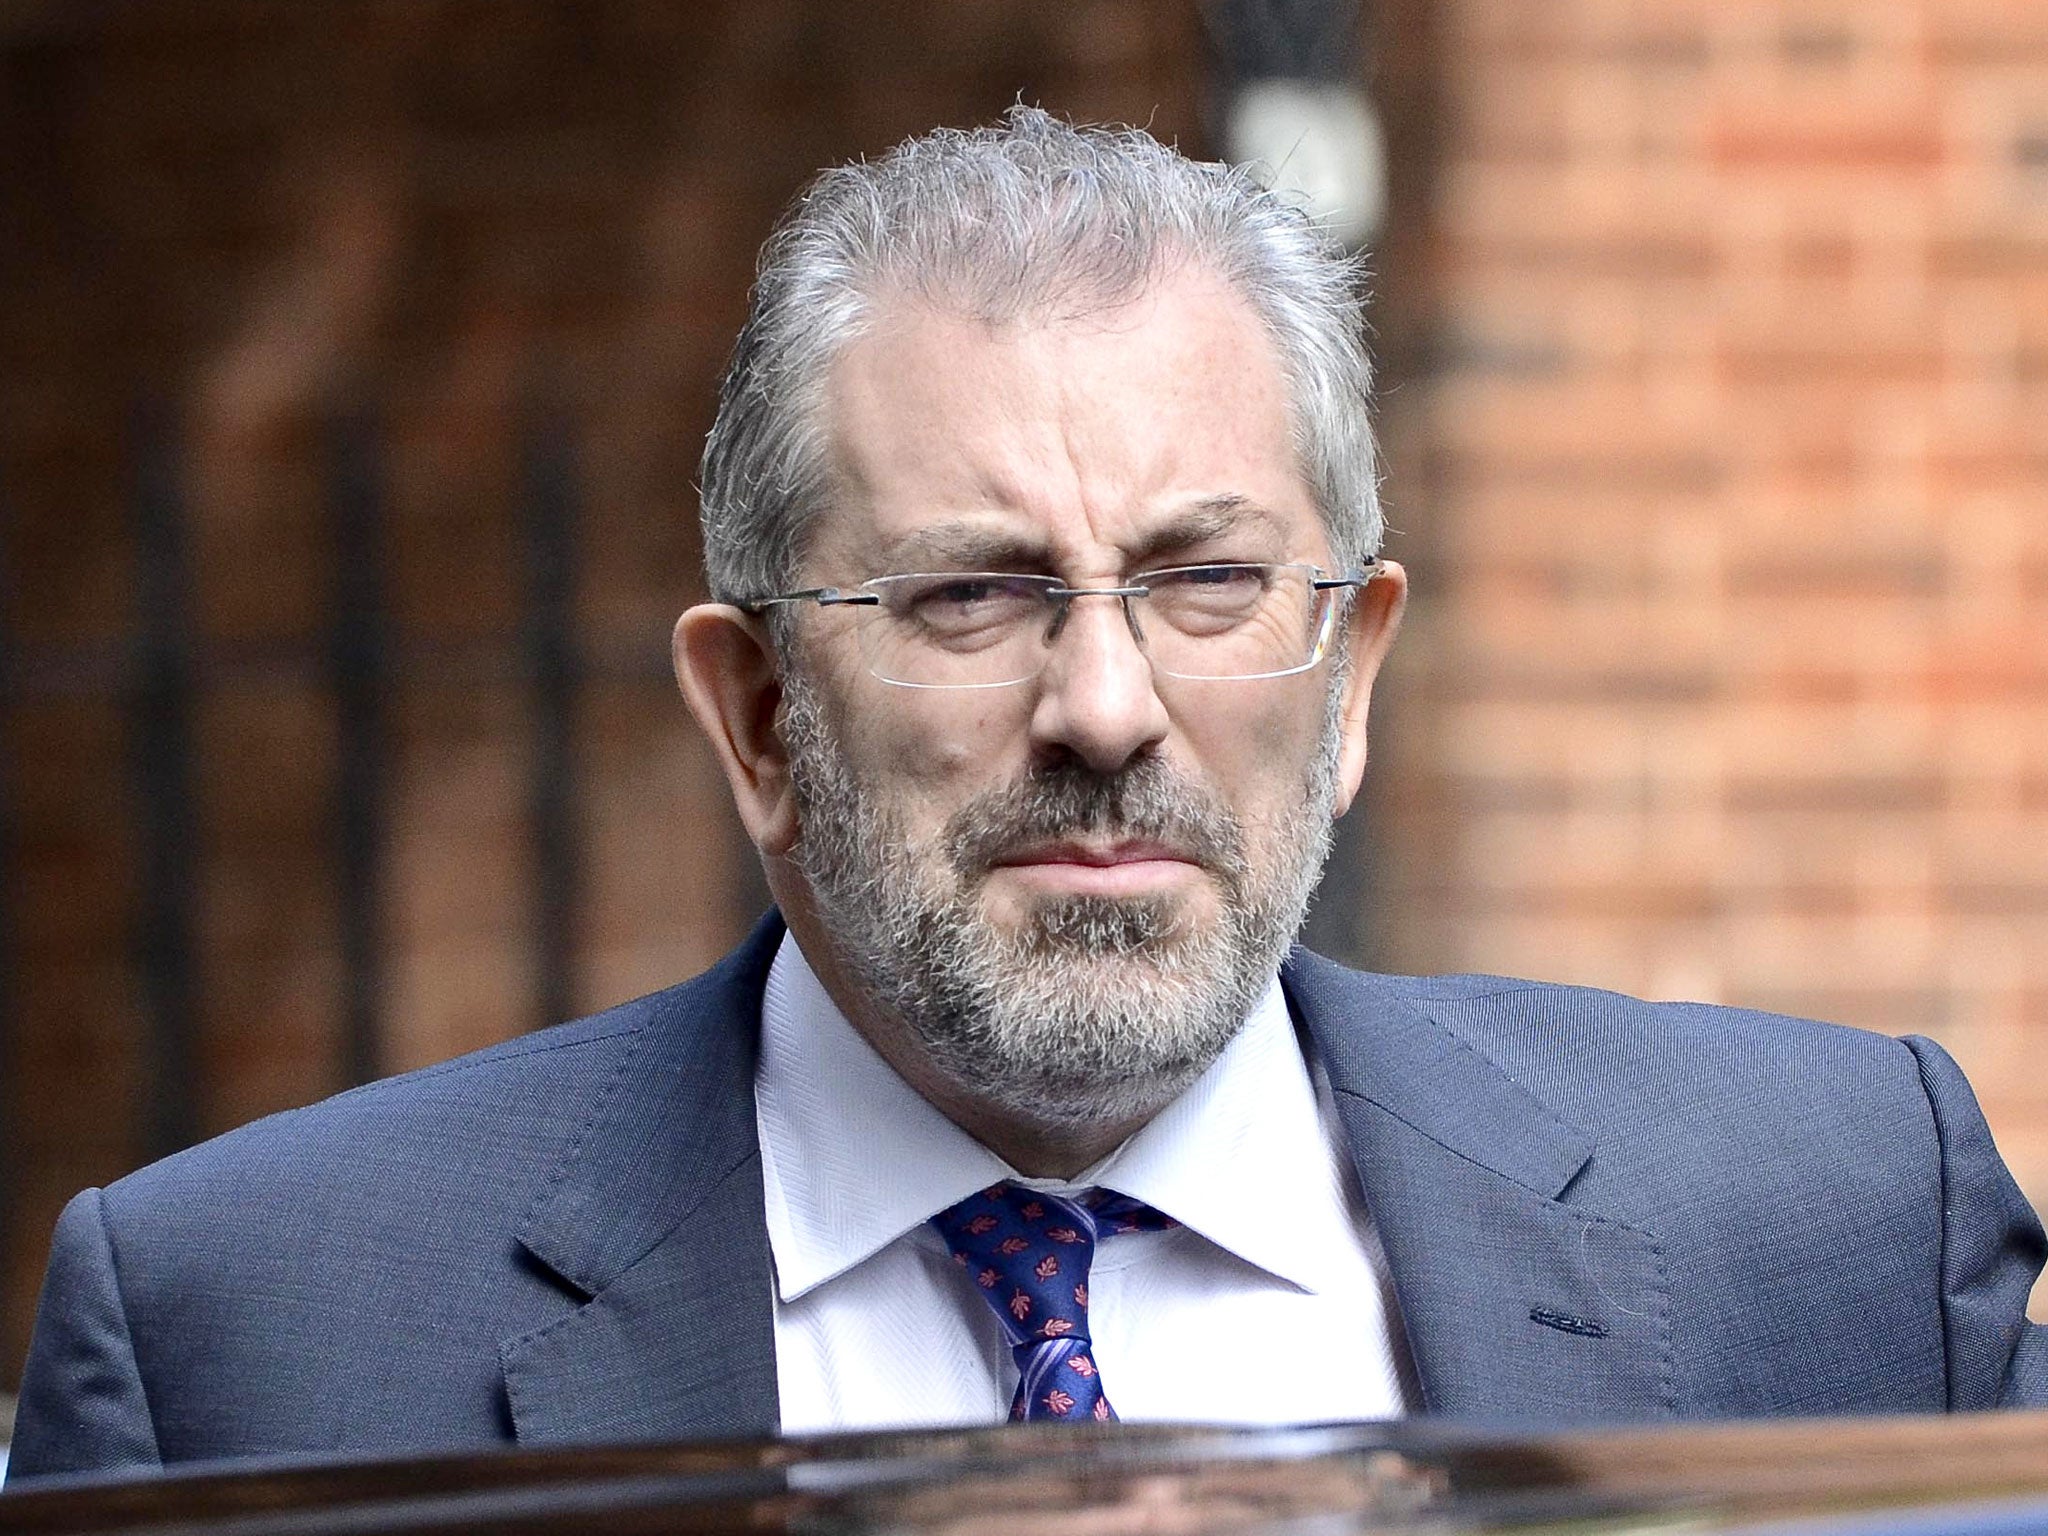 Lord Kerslake took on the role in April 2015 after heading up the civil service